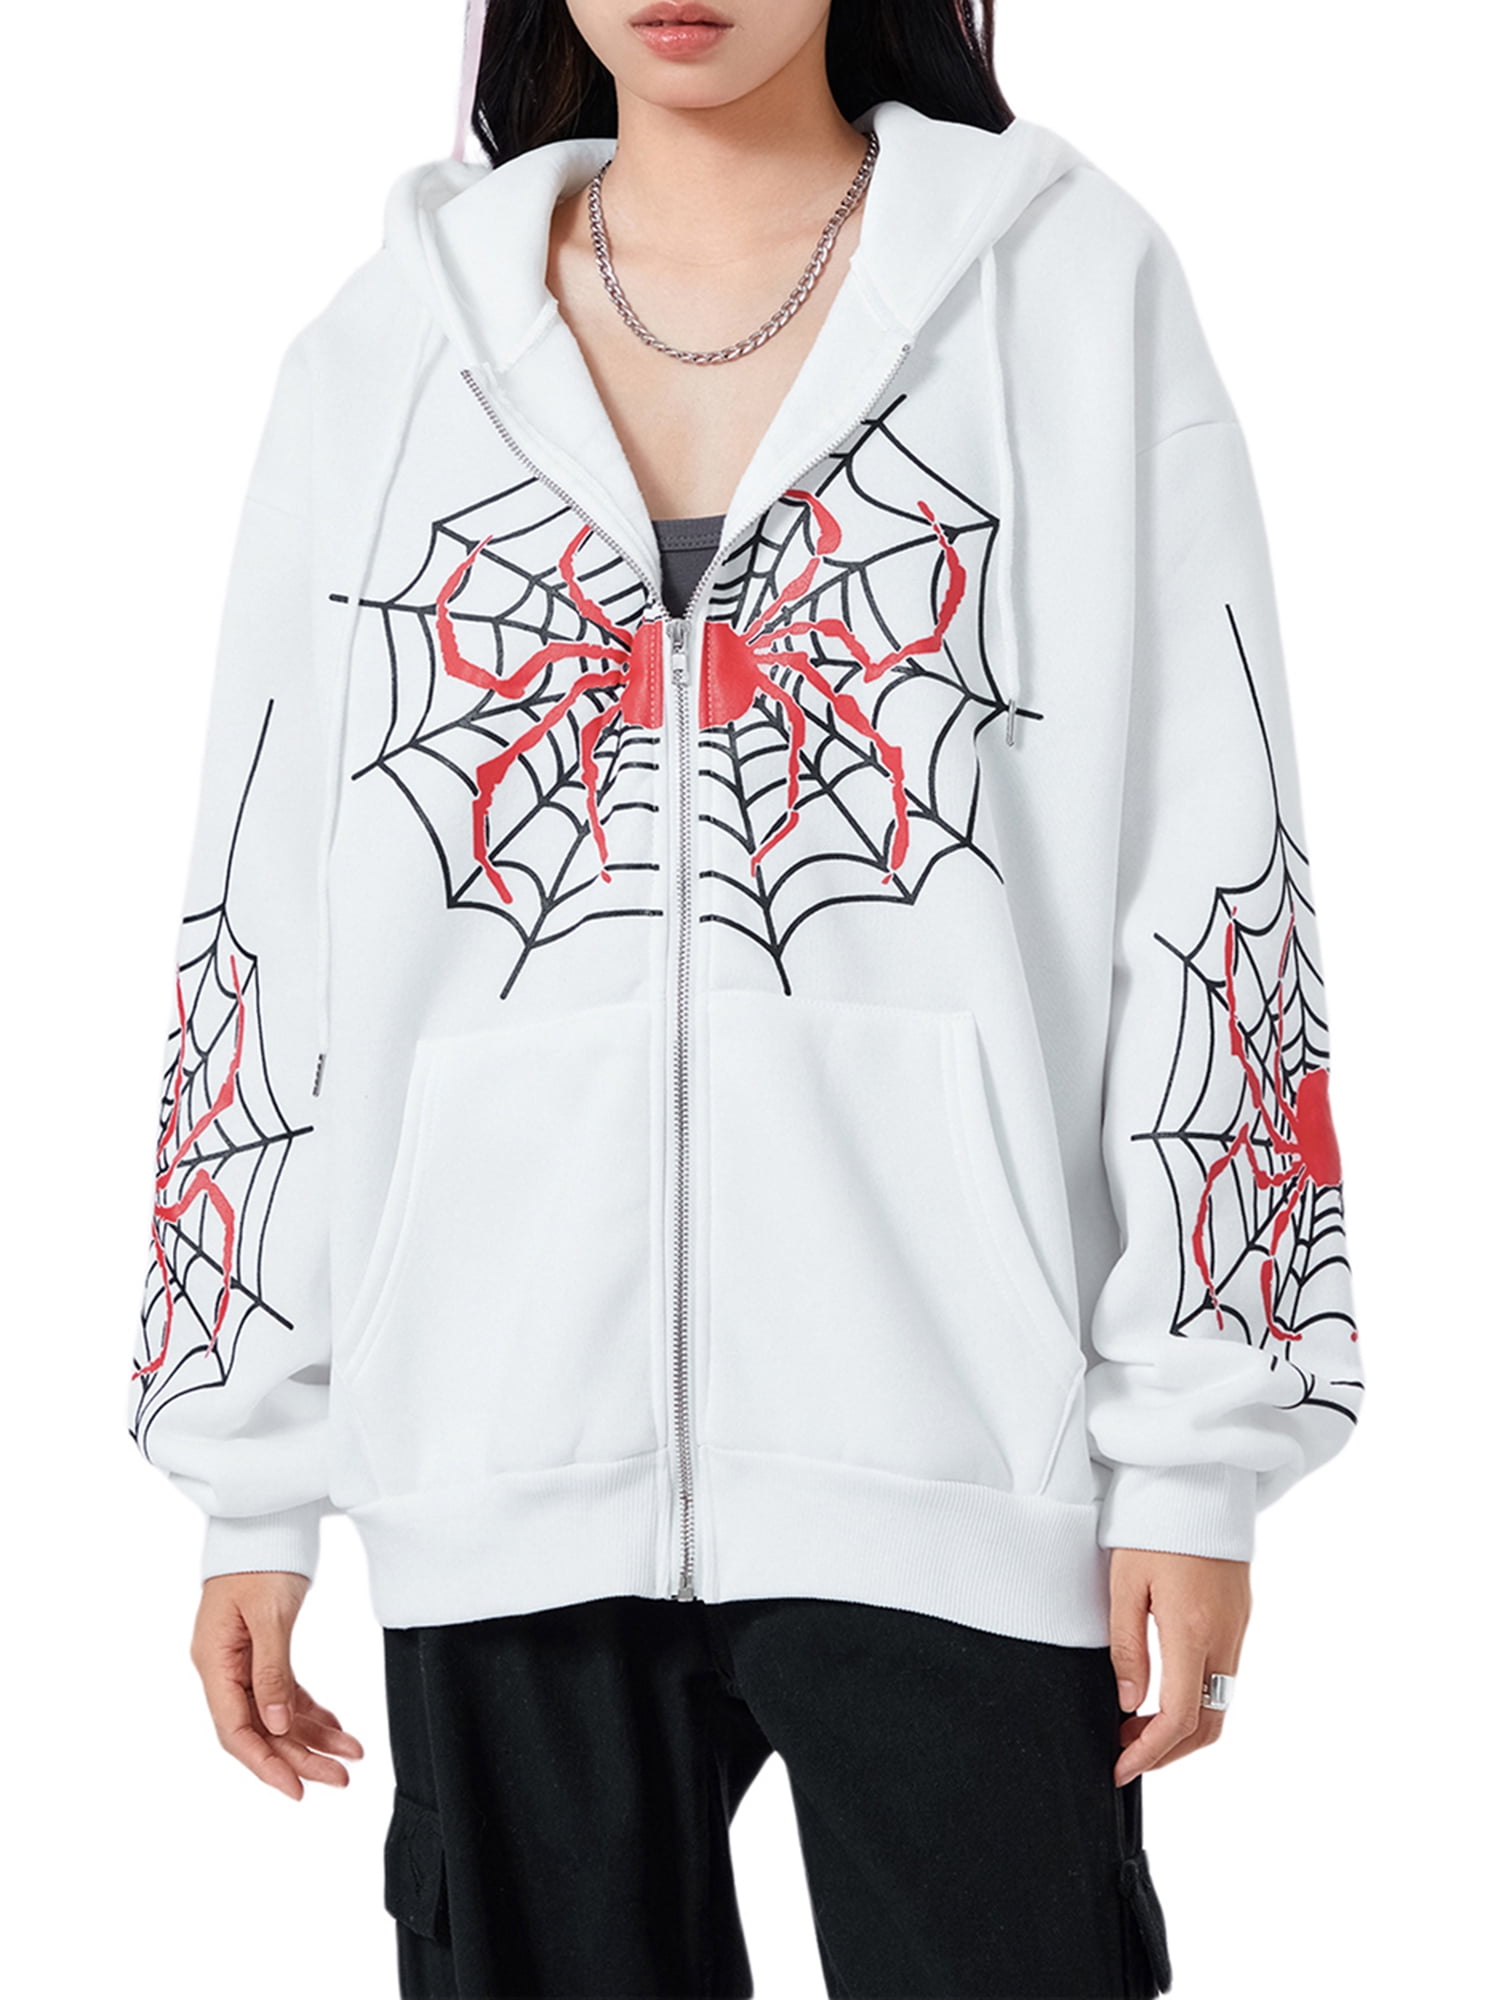 Women's spider hoodie are a unique and fashionable choice that combines style, comfort, and an edgy aesthetic.